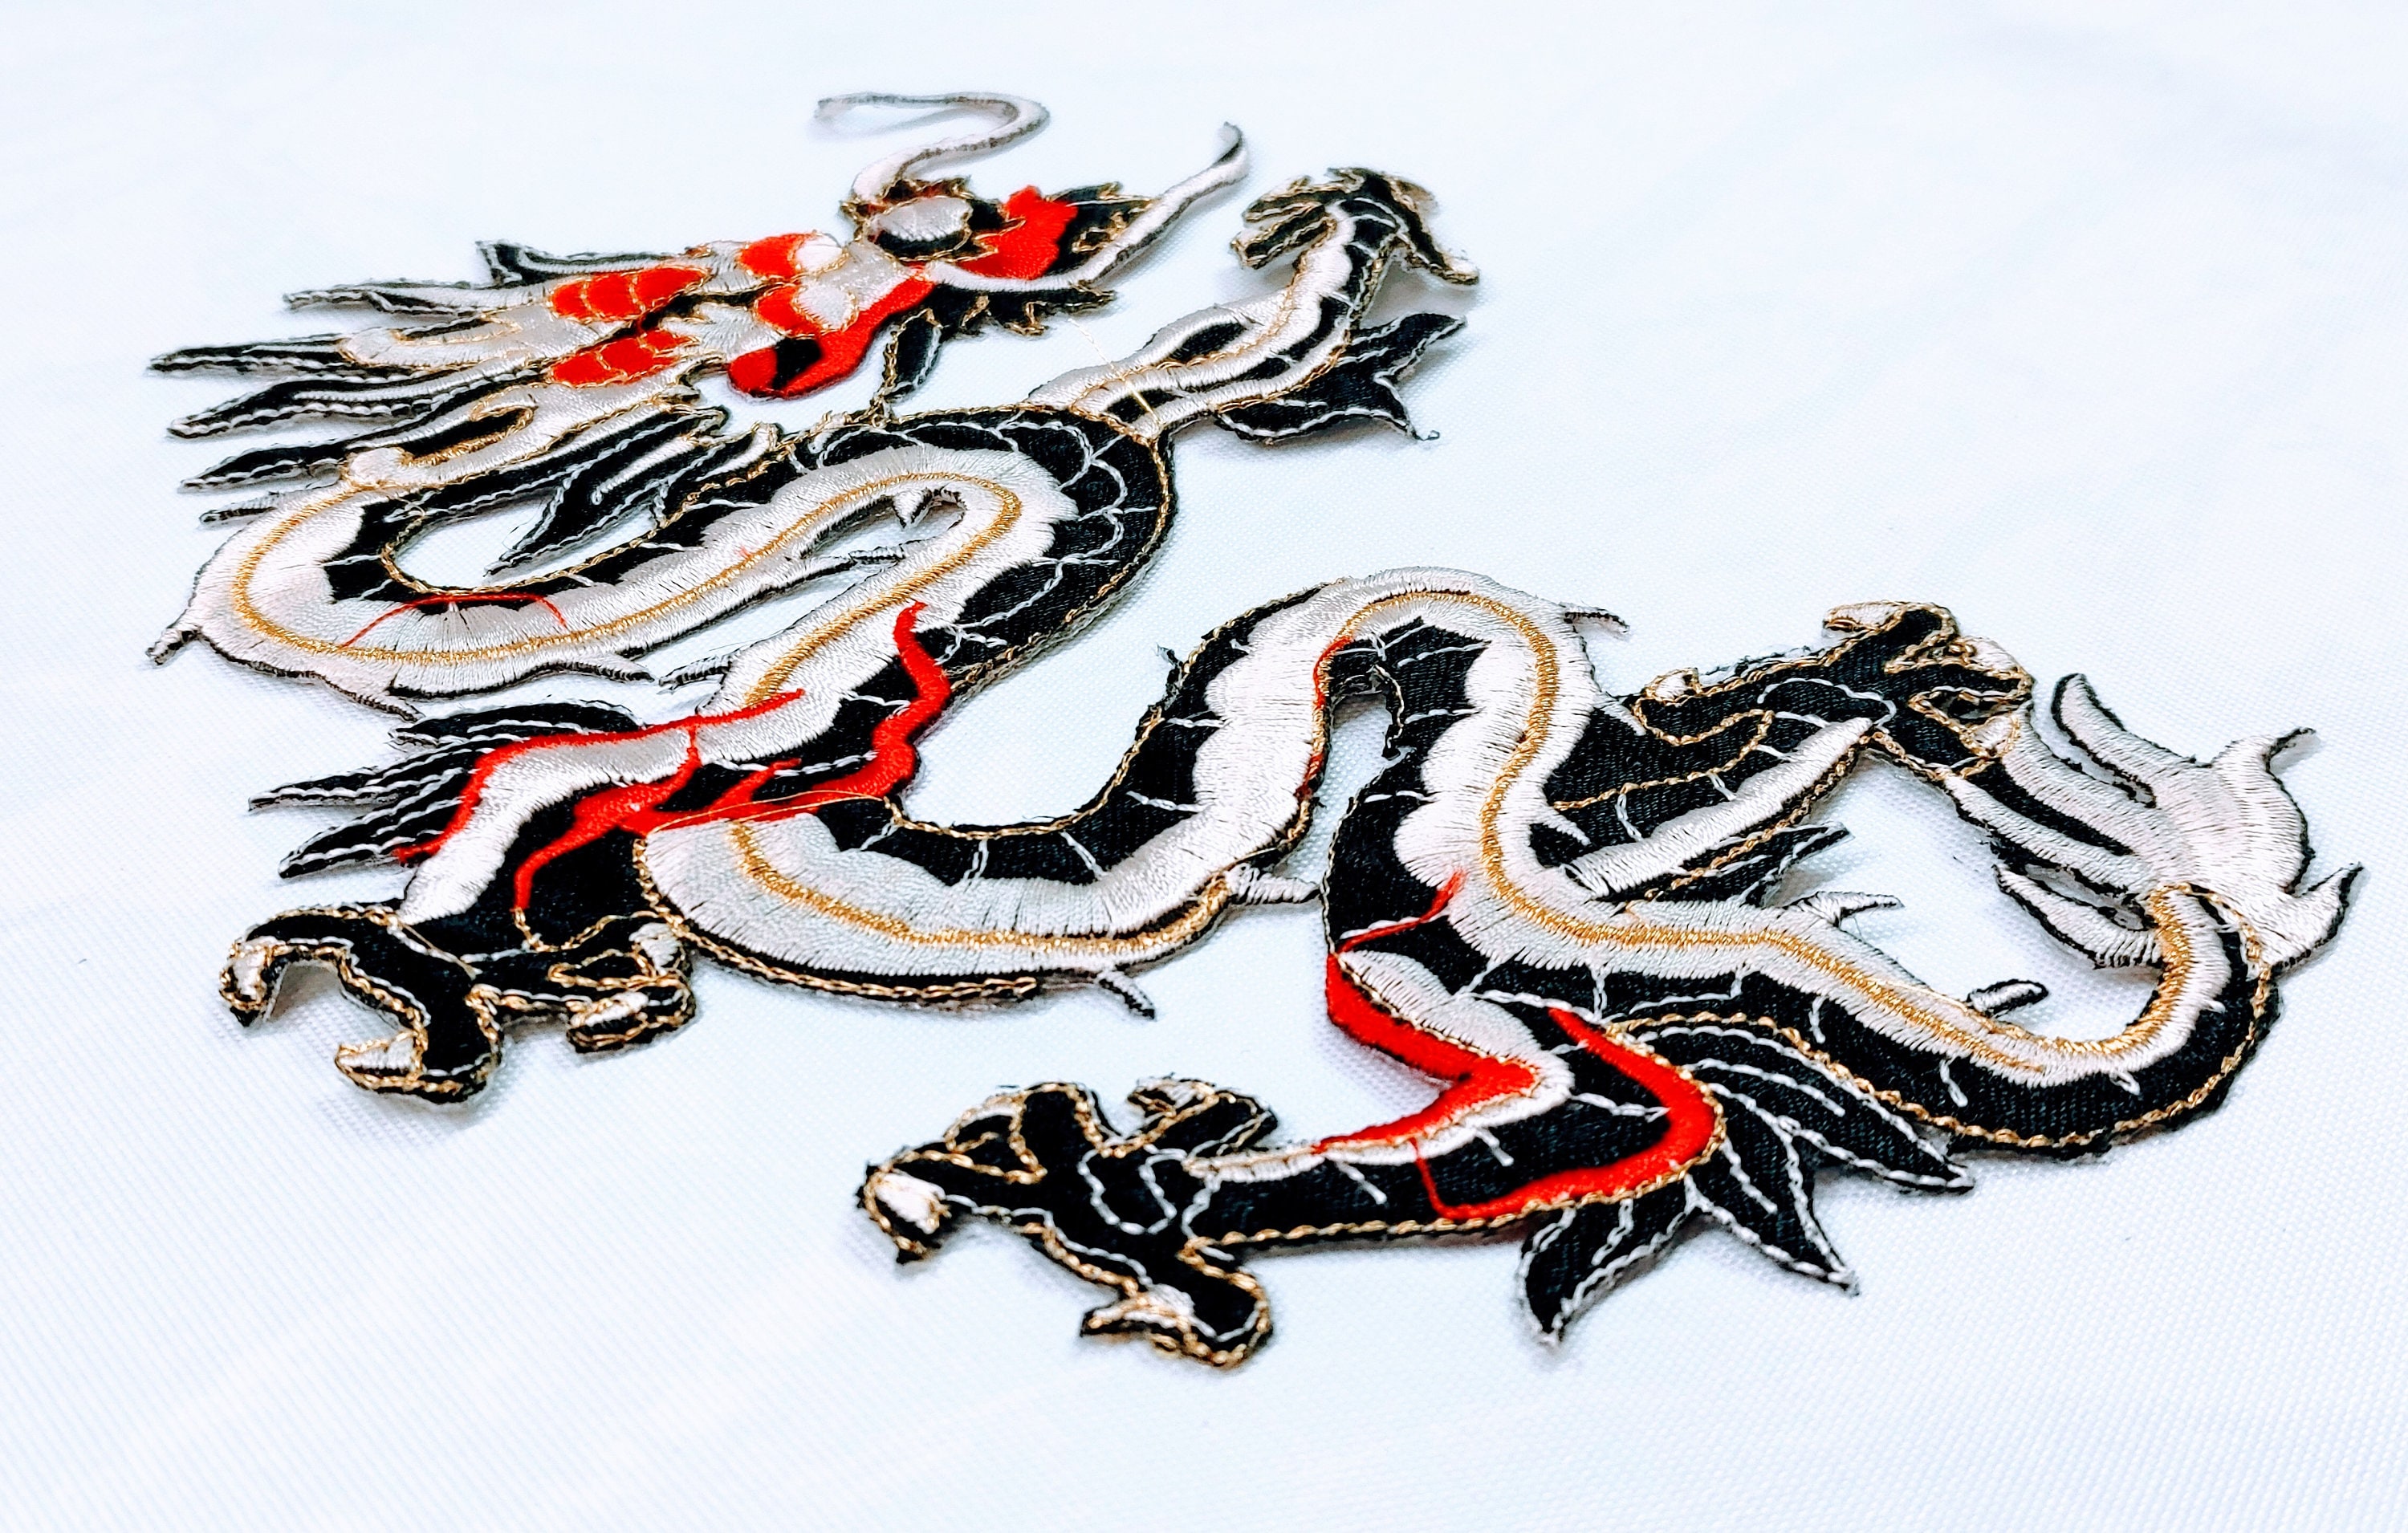 Large embroidered dragon patch black white, large iron on patches 126708 in  online supermarket